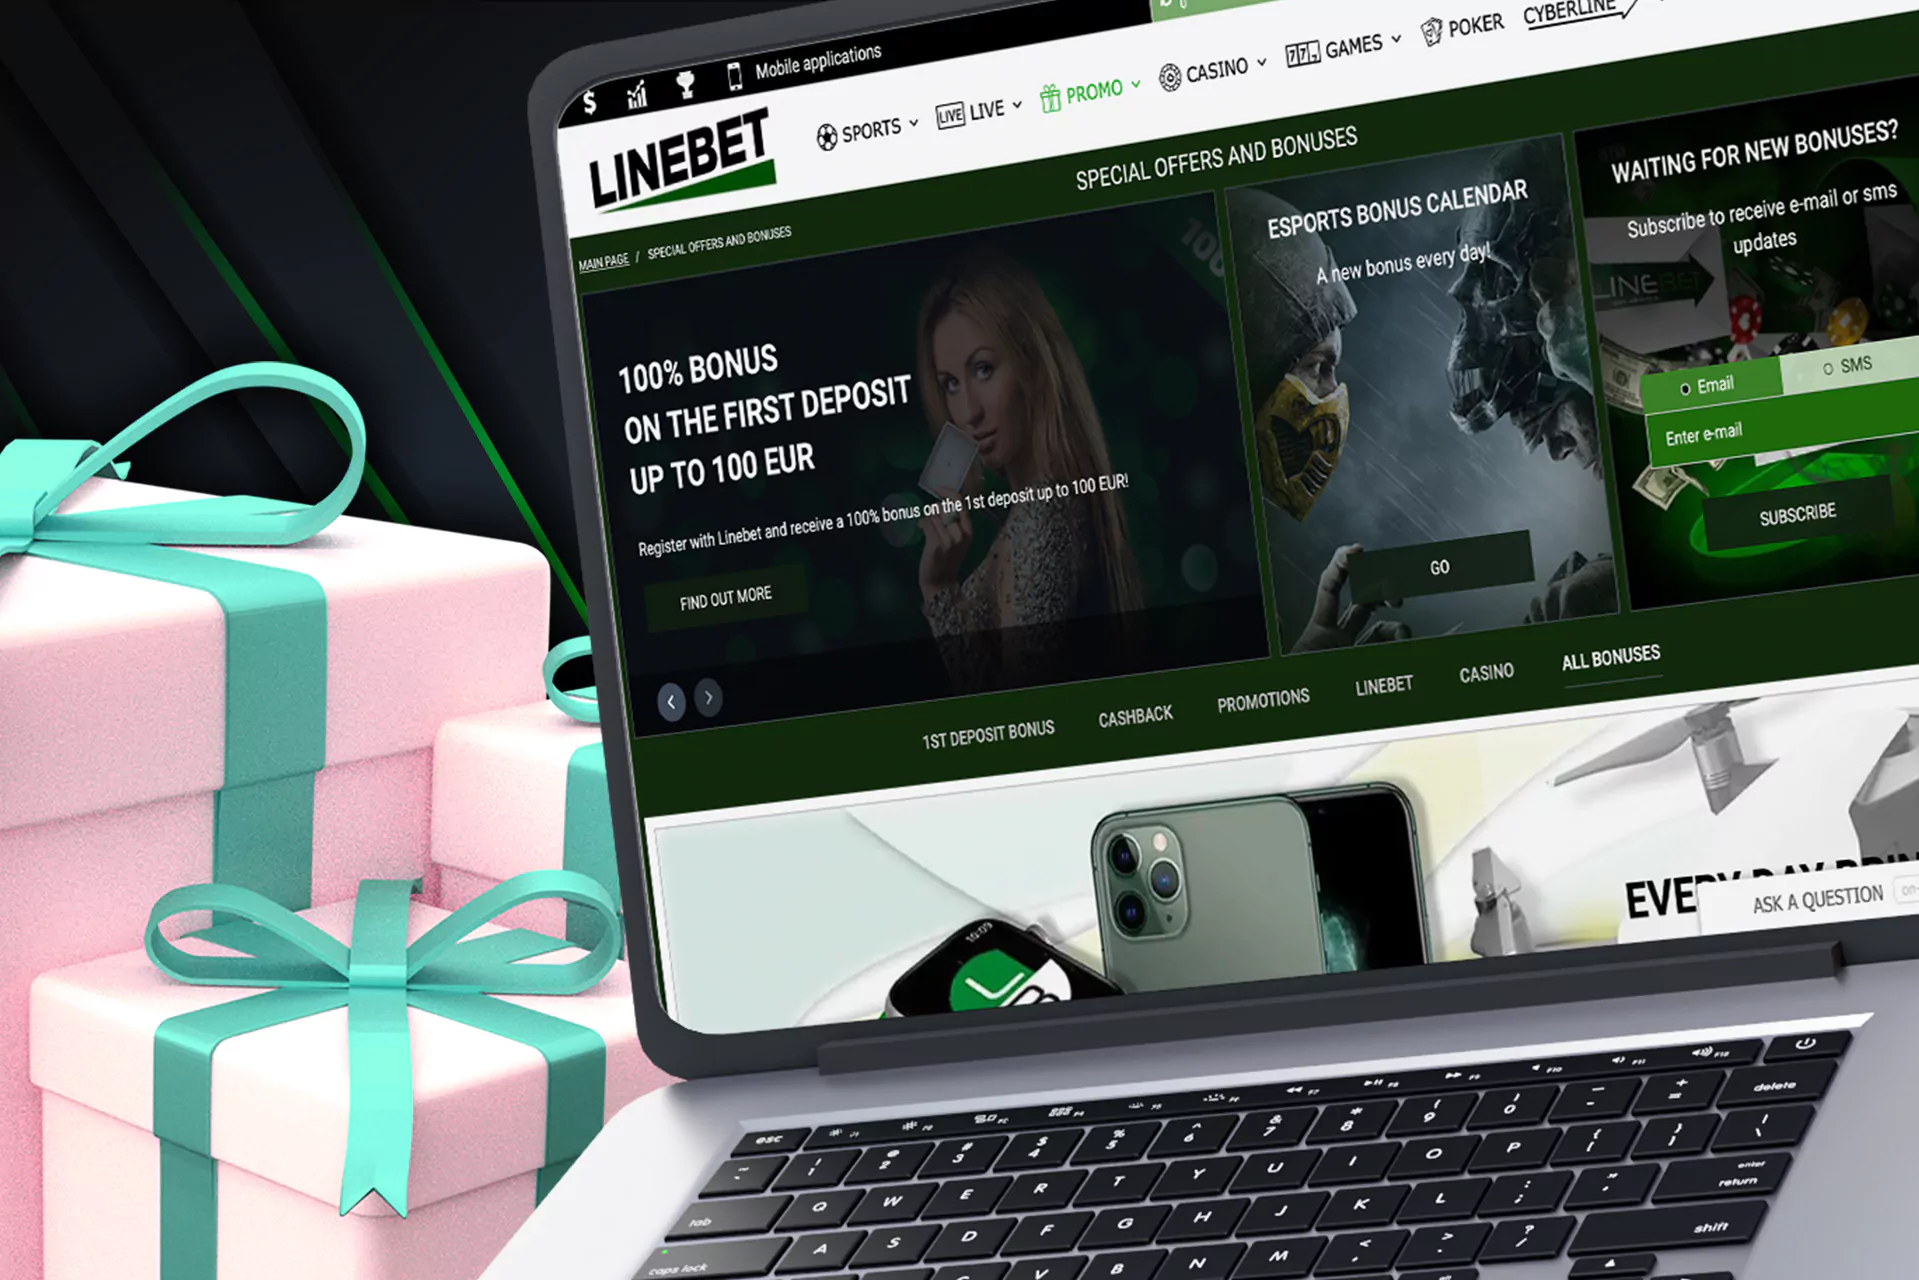 Lienebet offers different bonuses for newcomers and regular players.